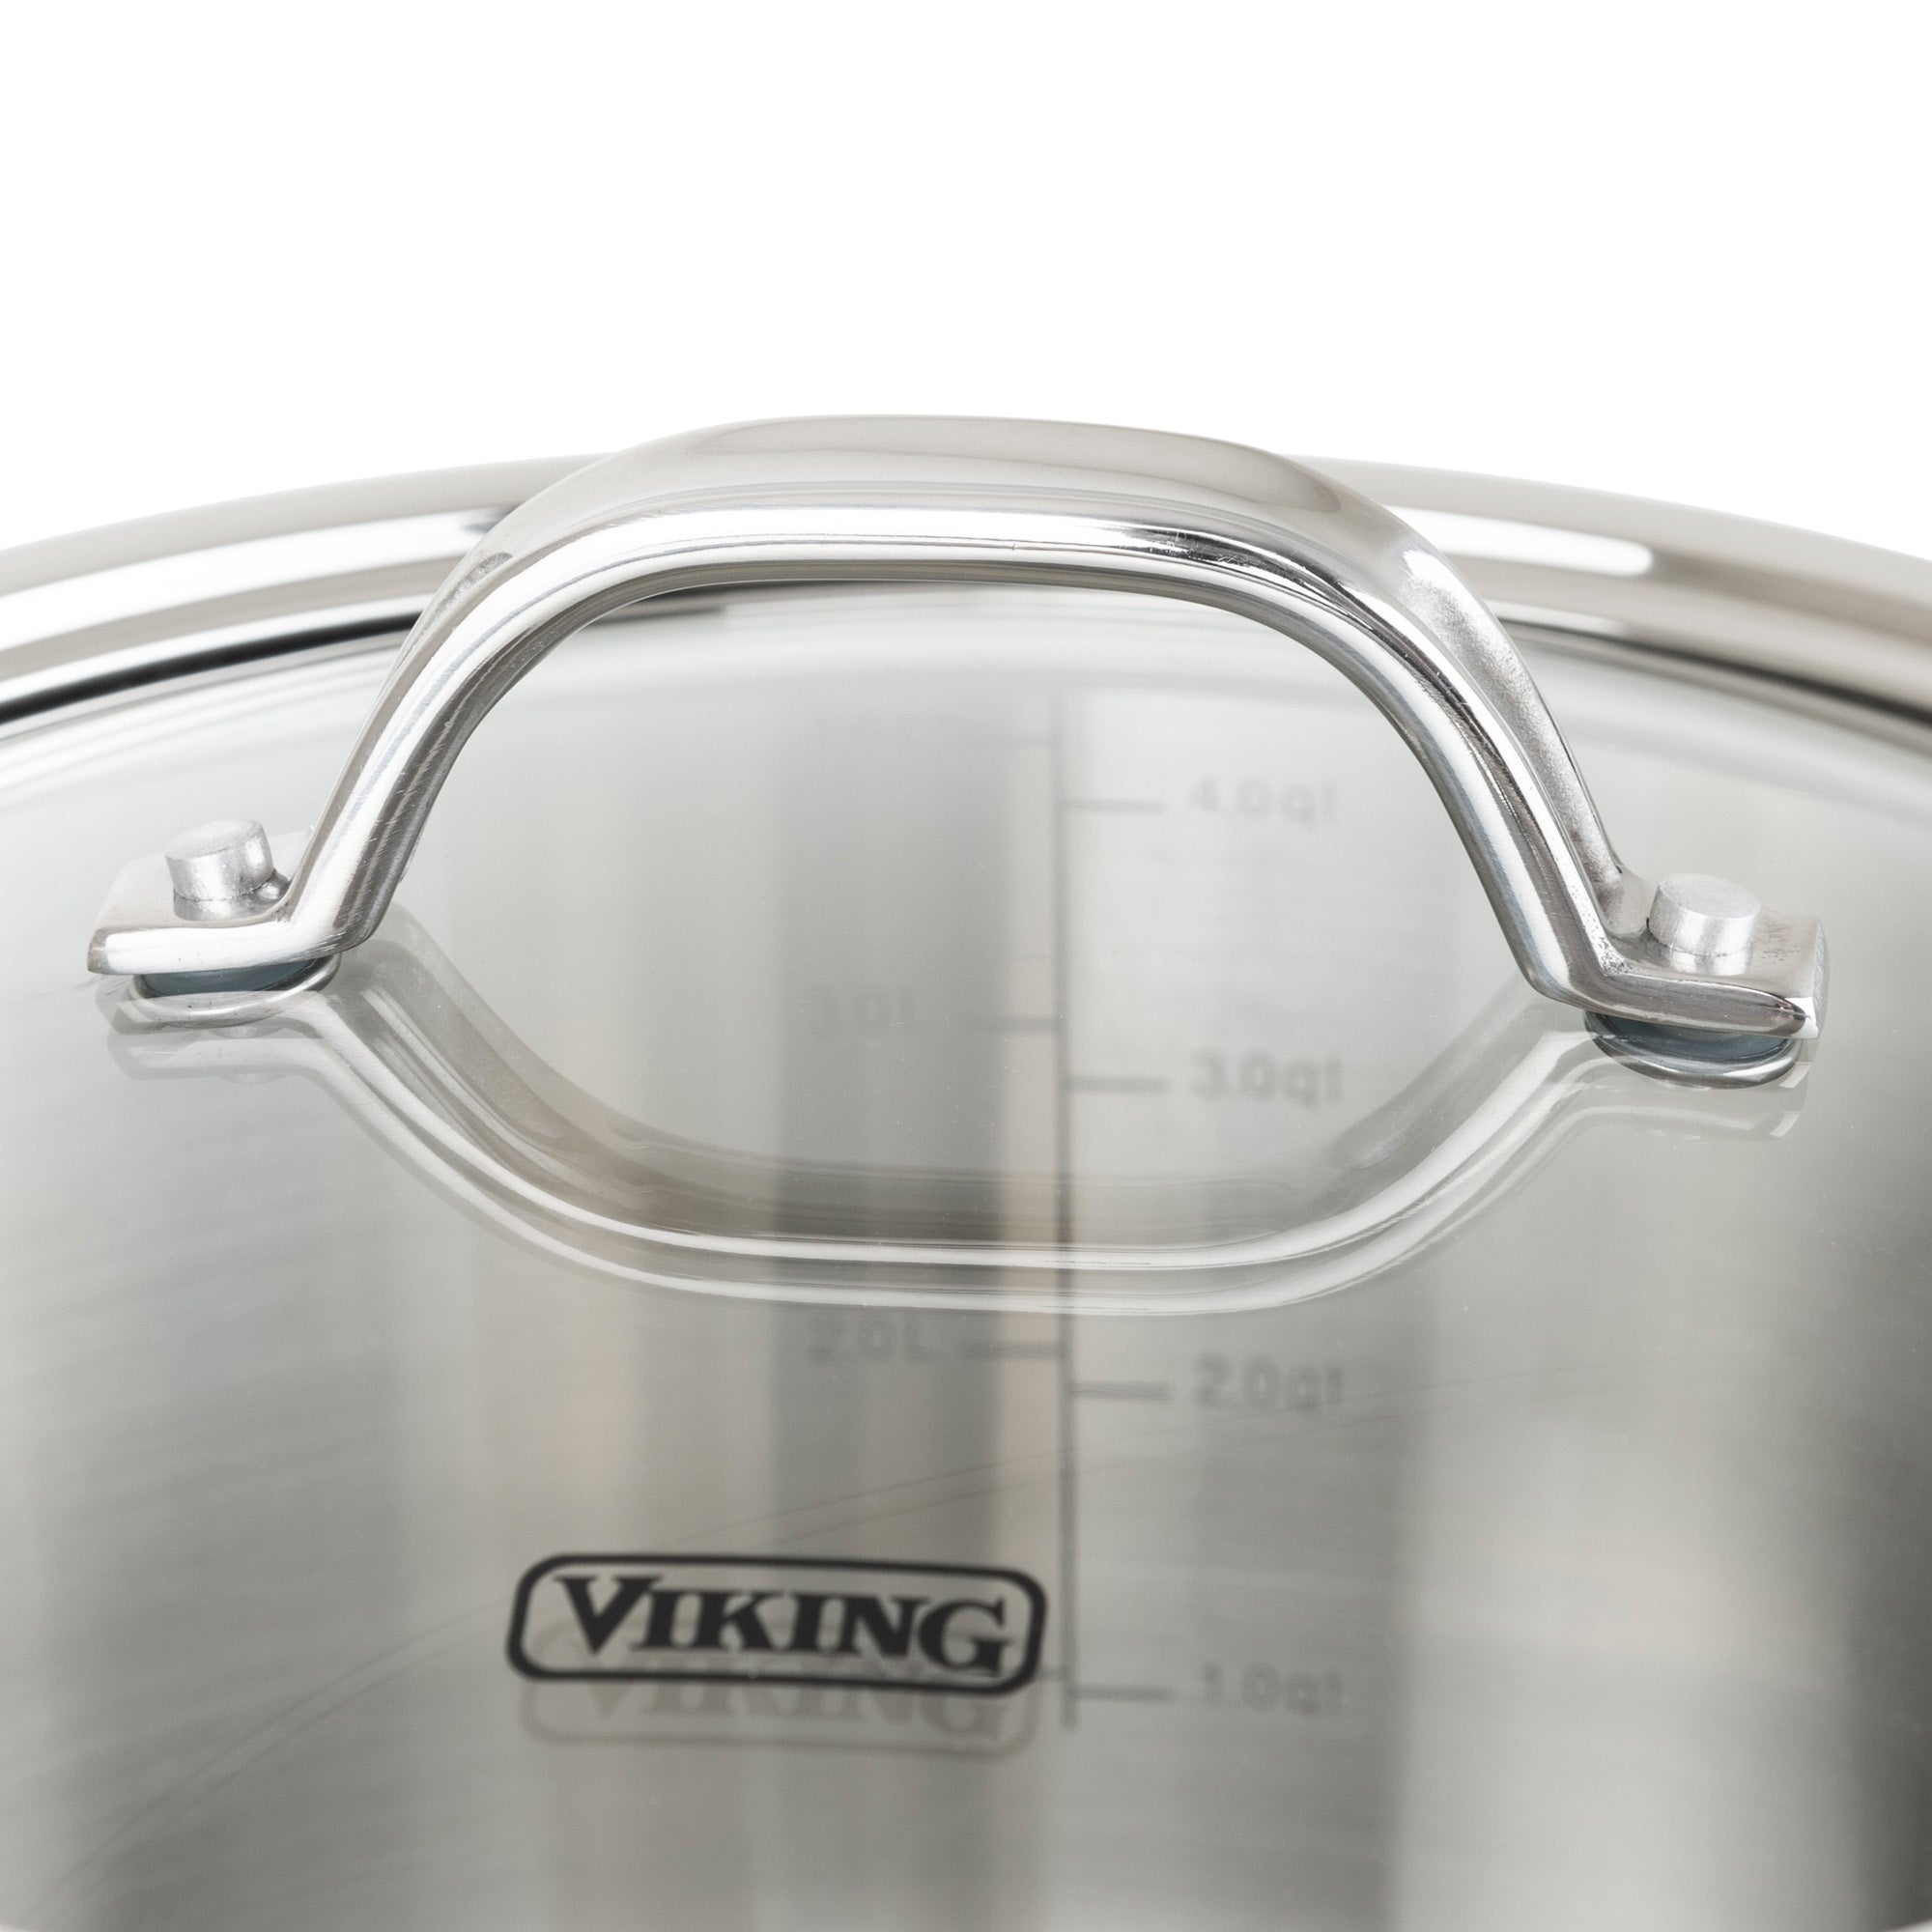 Viking Contemporary 3-Ply 5.2-Quart Dutch Oven with Glass Lid – Domaci